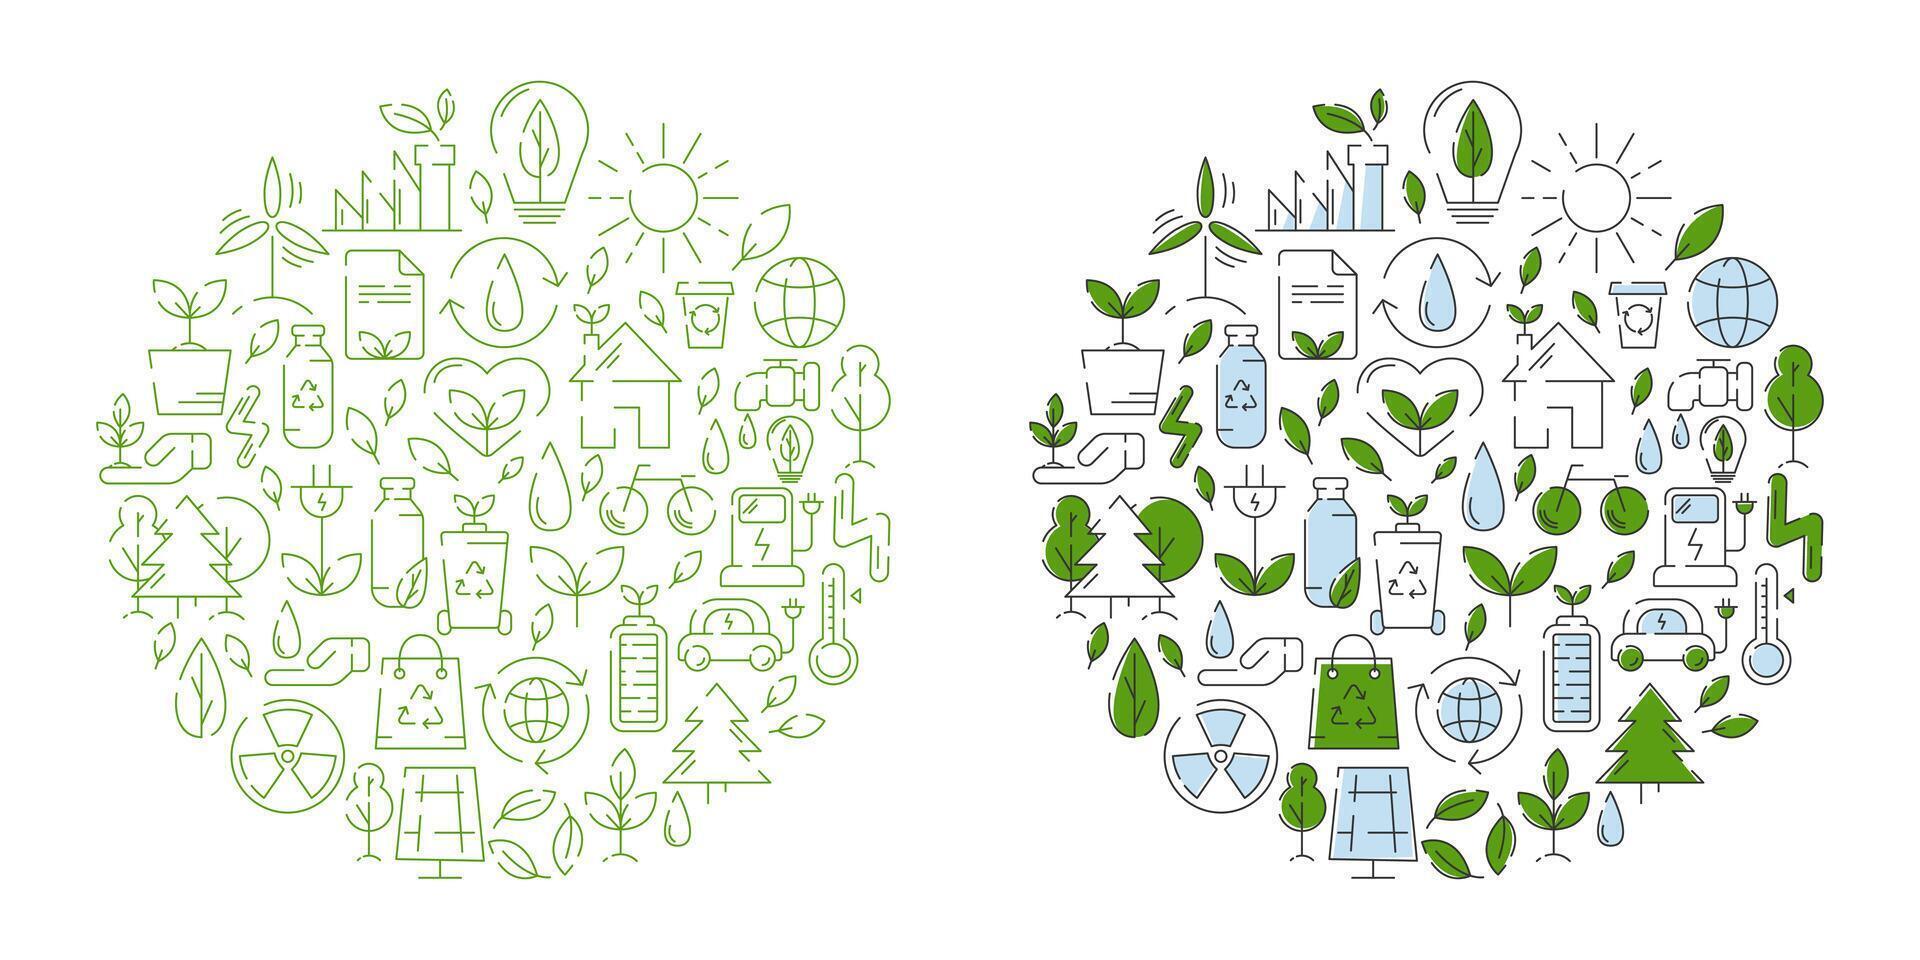 Ecology, line icons design, round form. Ecology environment improvement, sustainability, recycle, renewable energy, nature. Eco friendly vector illustration. Concept of net zero emissions by 2050.